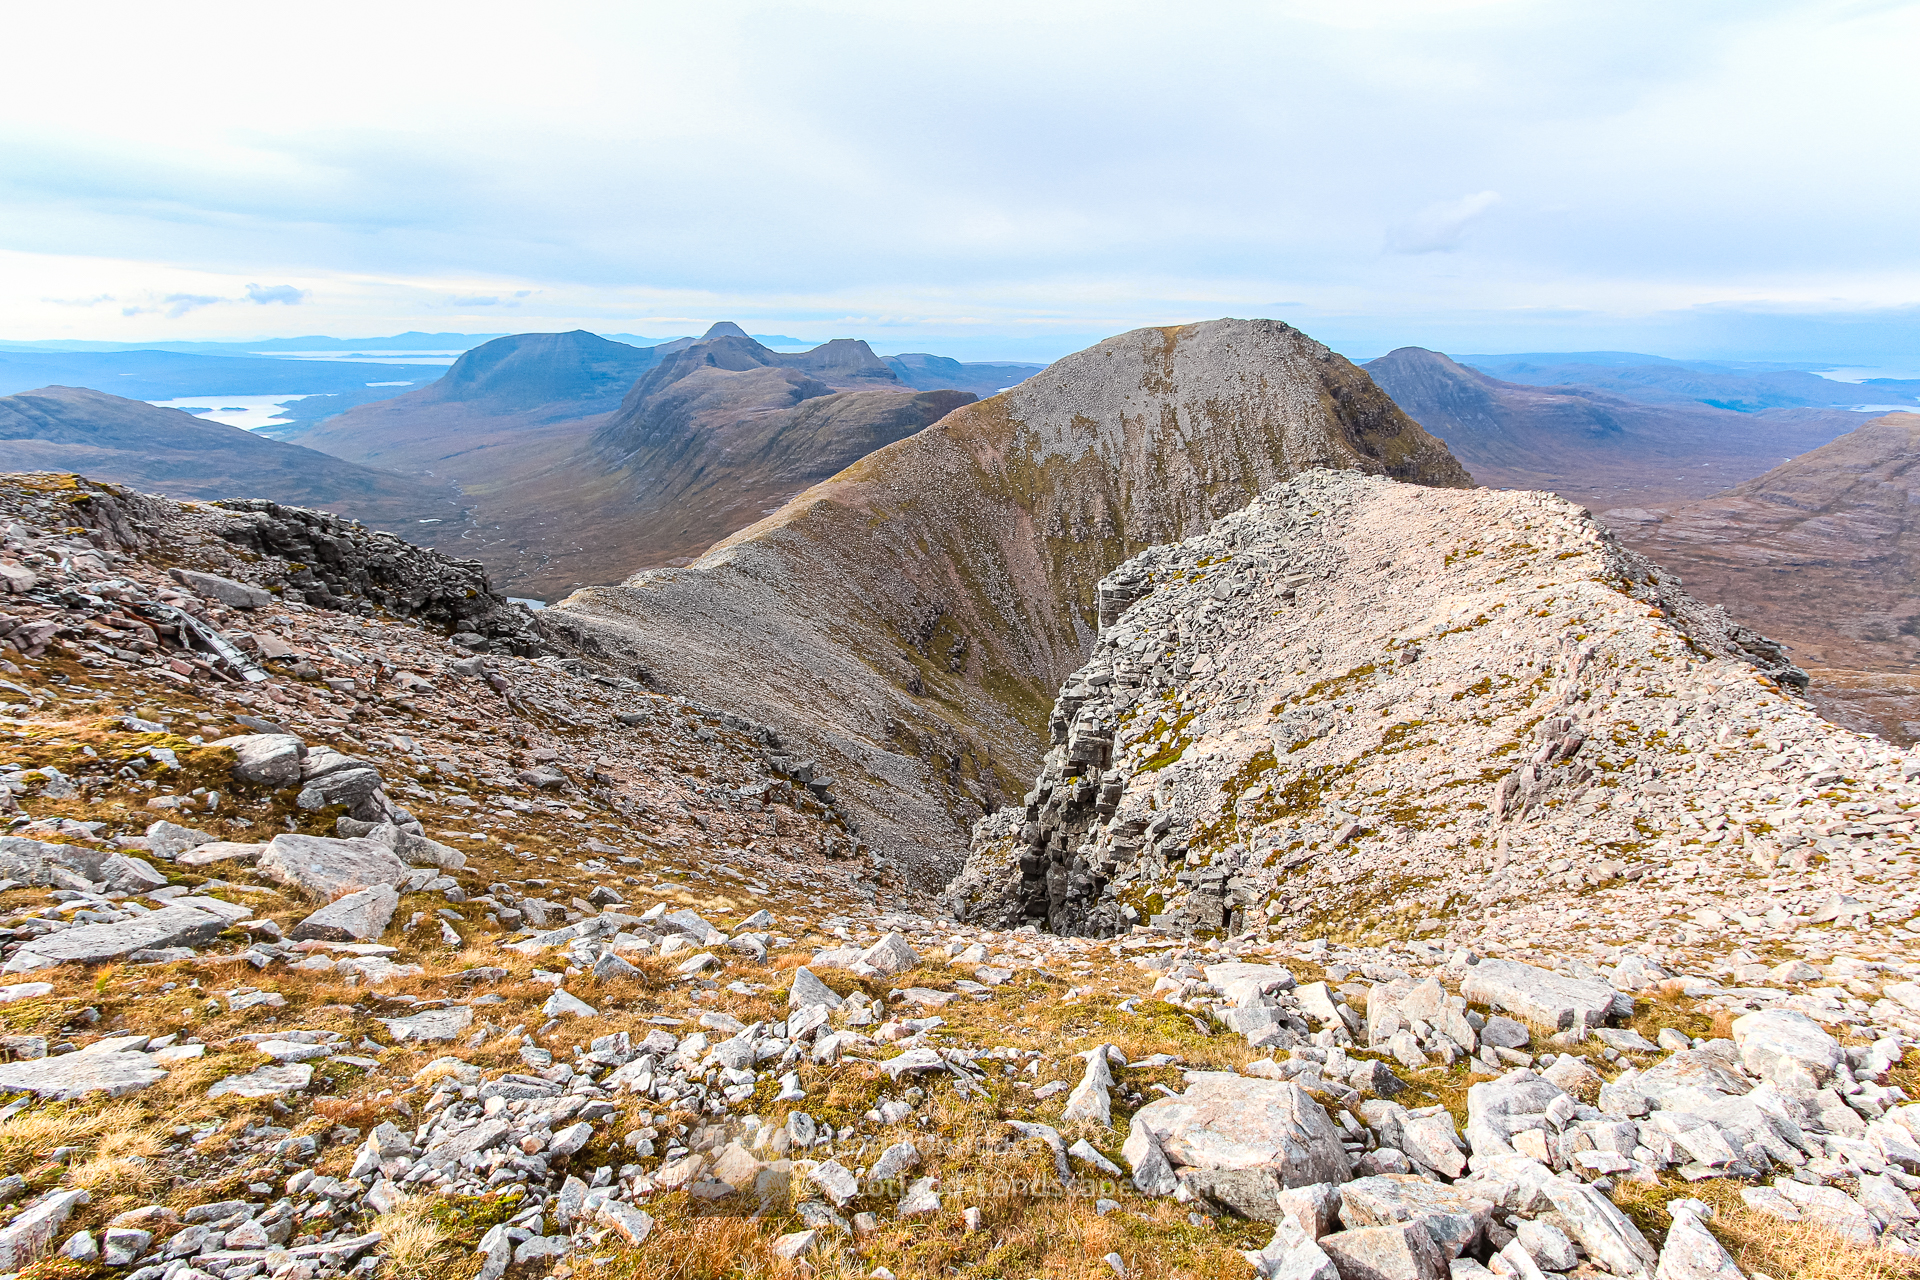 Sail Mhor from Coinneach Mhor at the top of the Triple Buttress of Coire Mhic Fhearchair, Torridon & Fisherfield